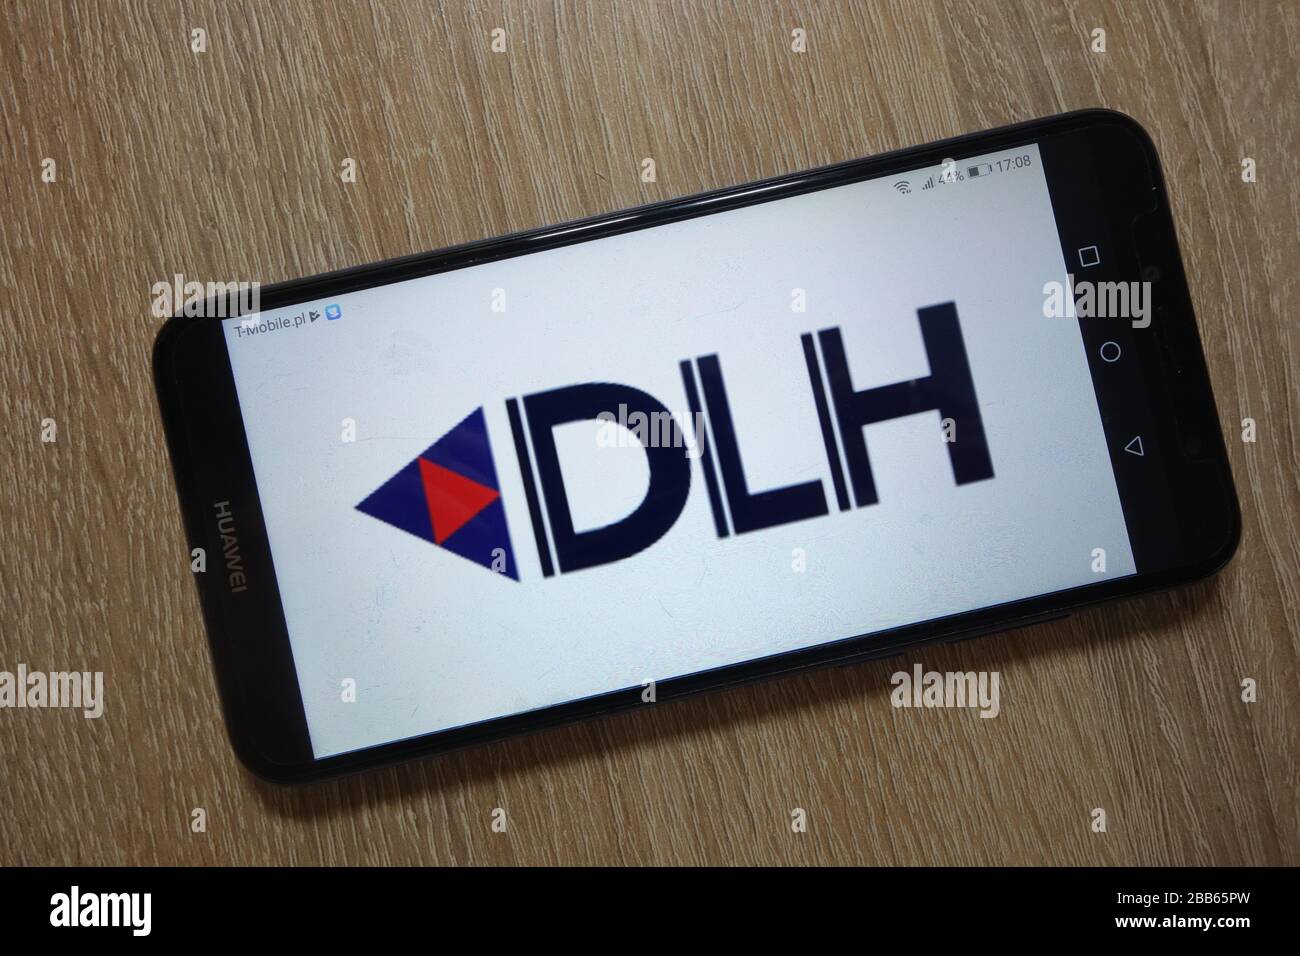 DLH Holdings Corp. logo displayed on smartphone Stock Photo